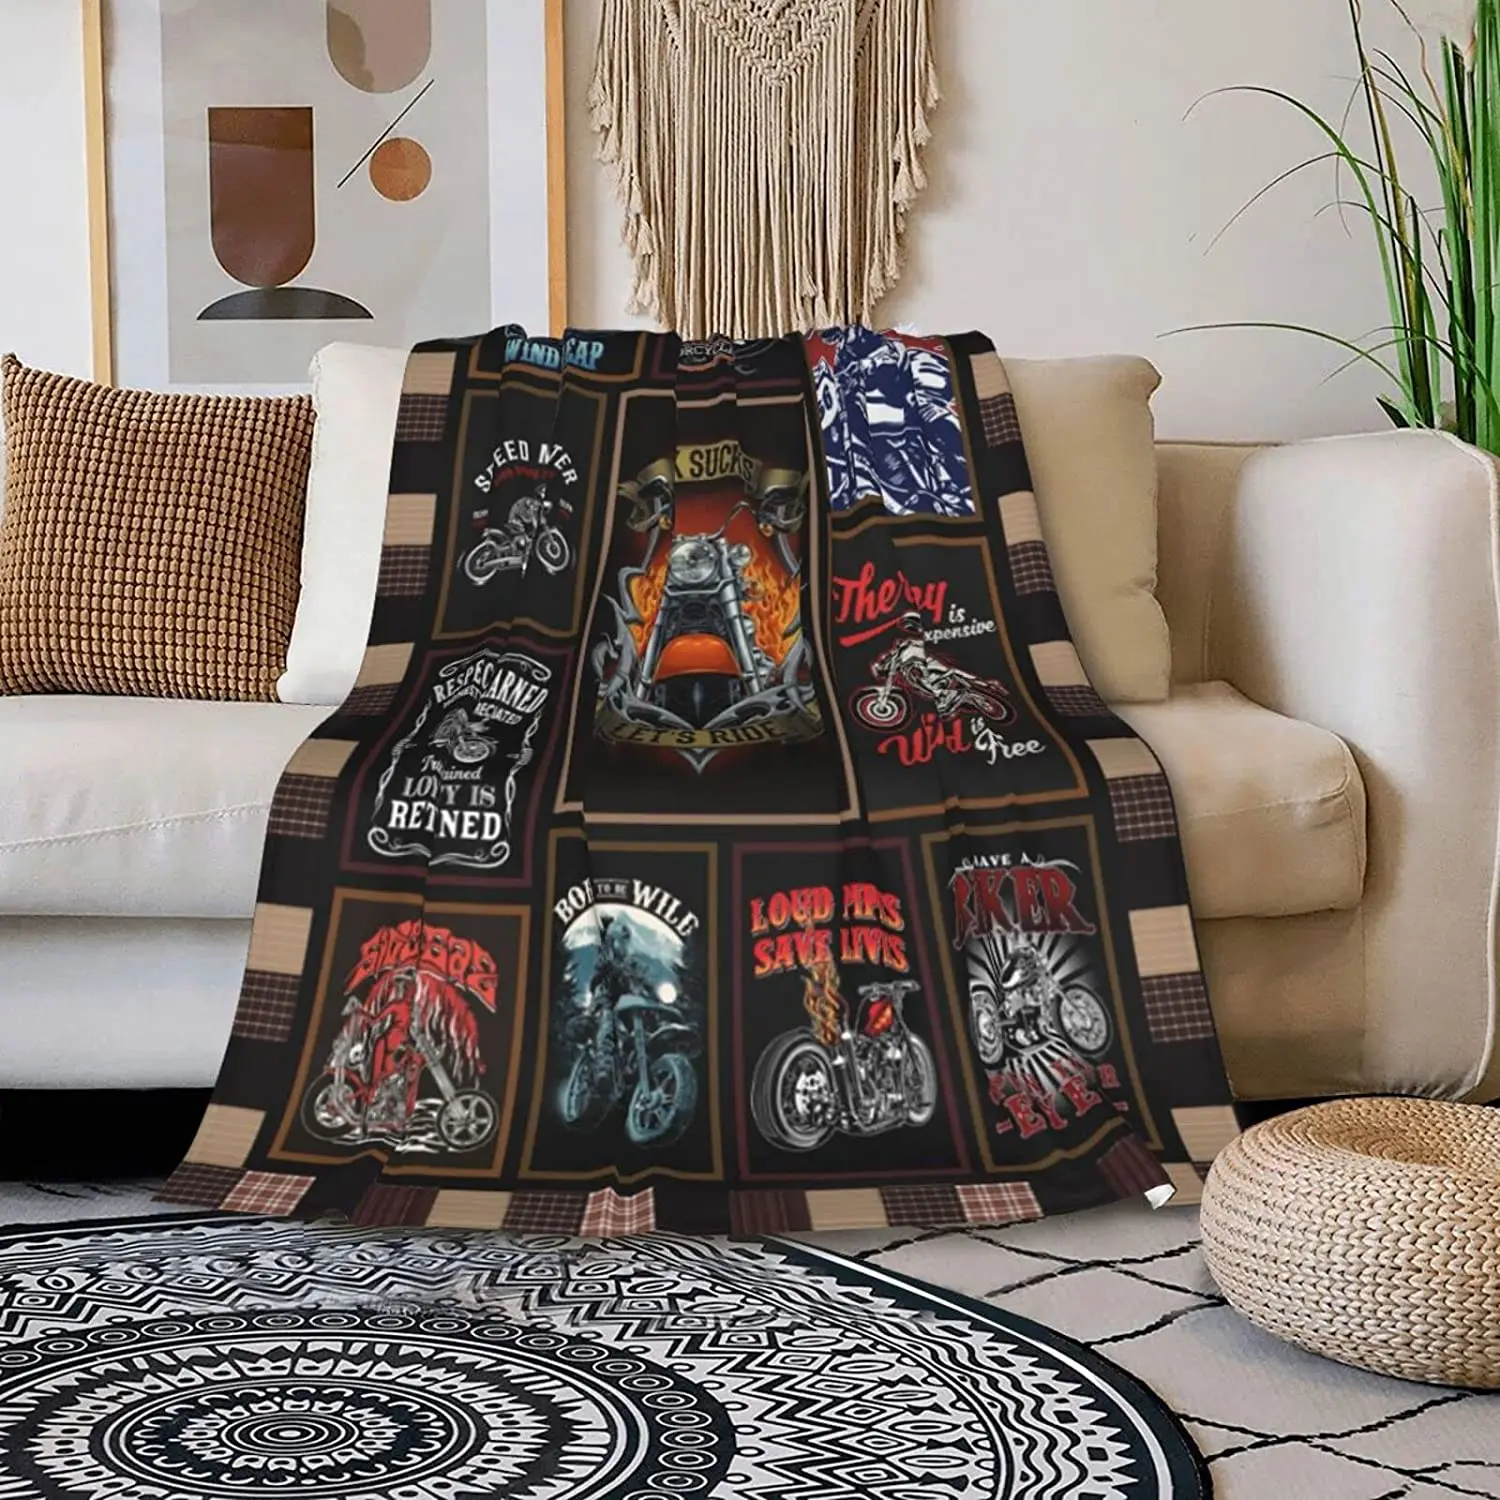 

Motocycle Blanket Warm Throws Blankets for Bed Couch Sofa All Season Super Cozy Plush Blanket for Kids and Adults Bedroom